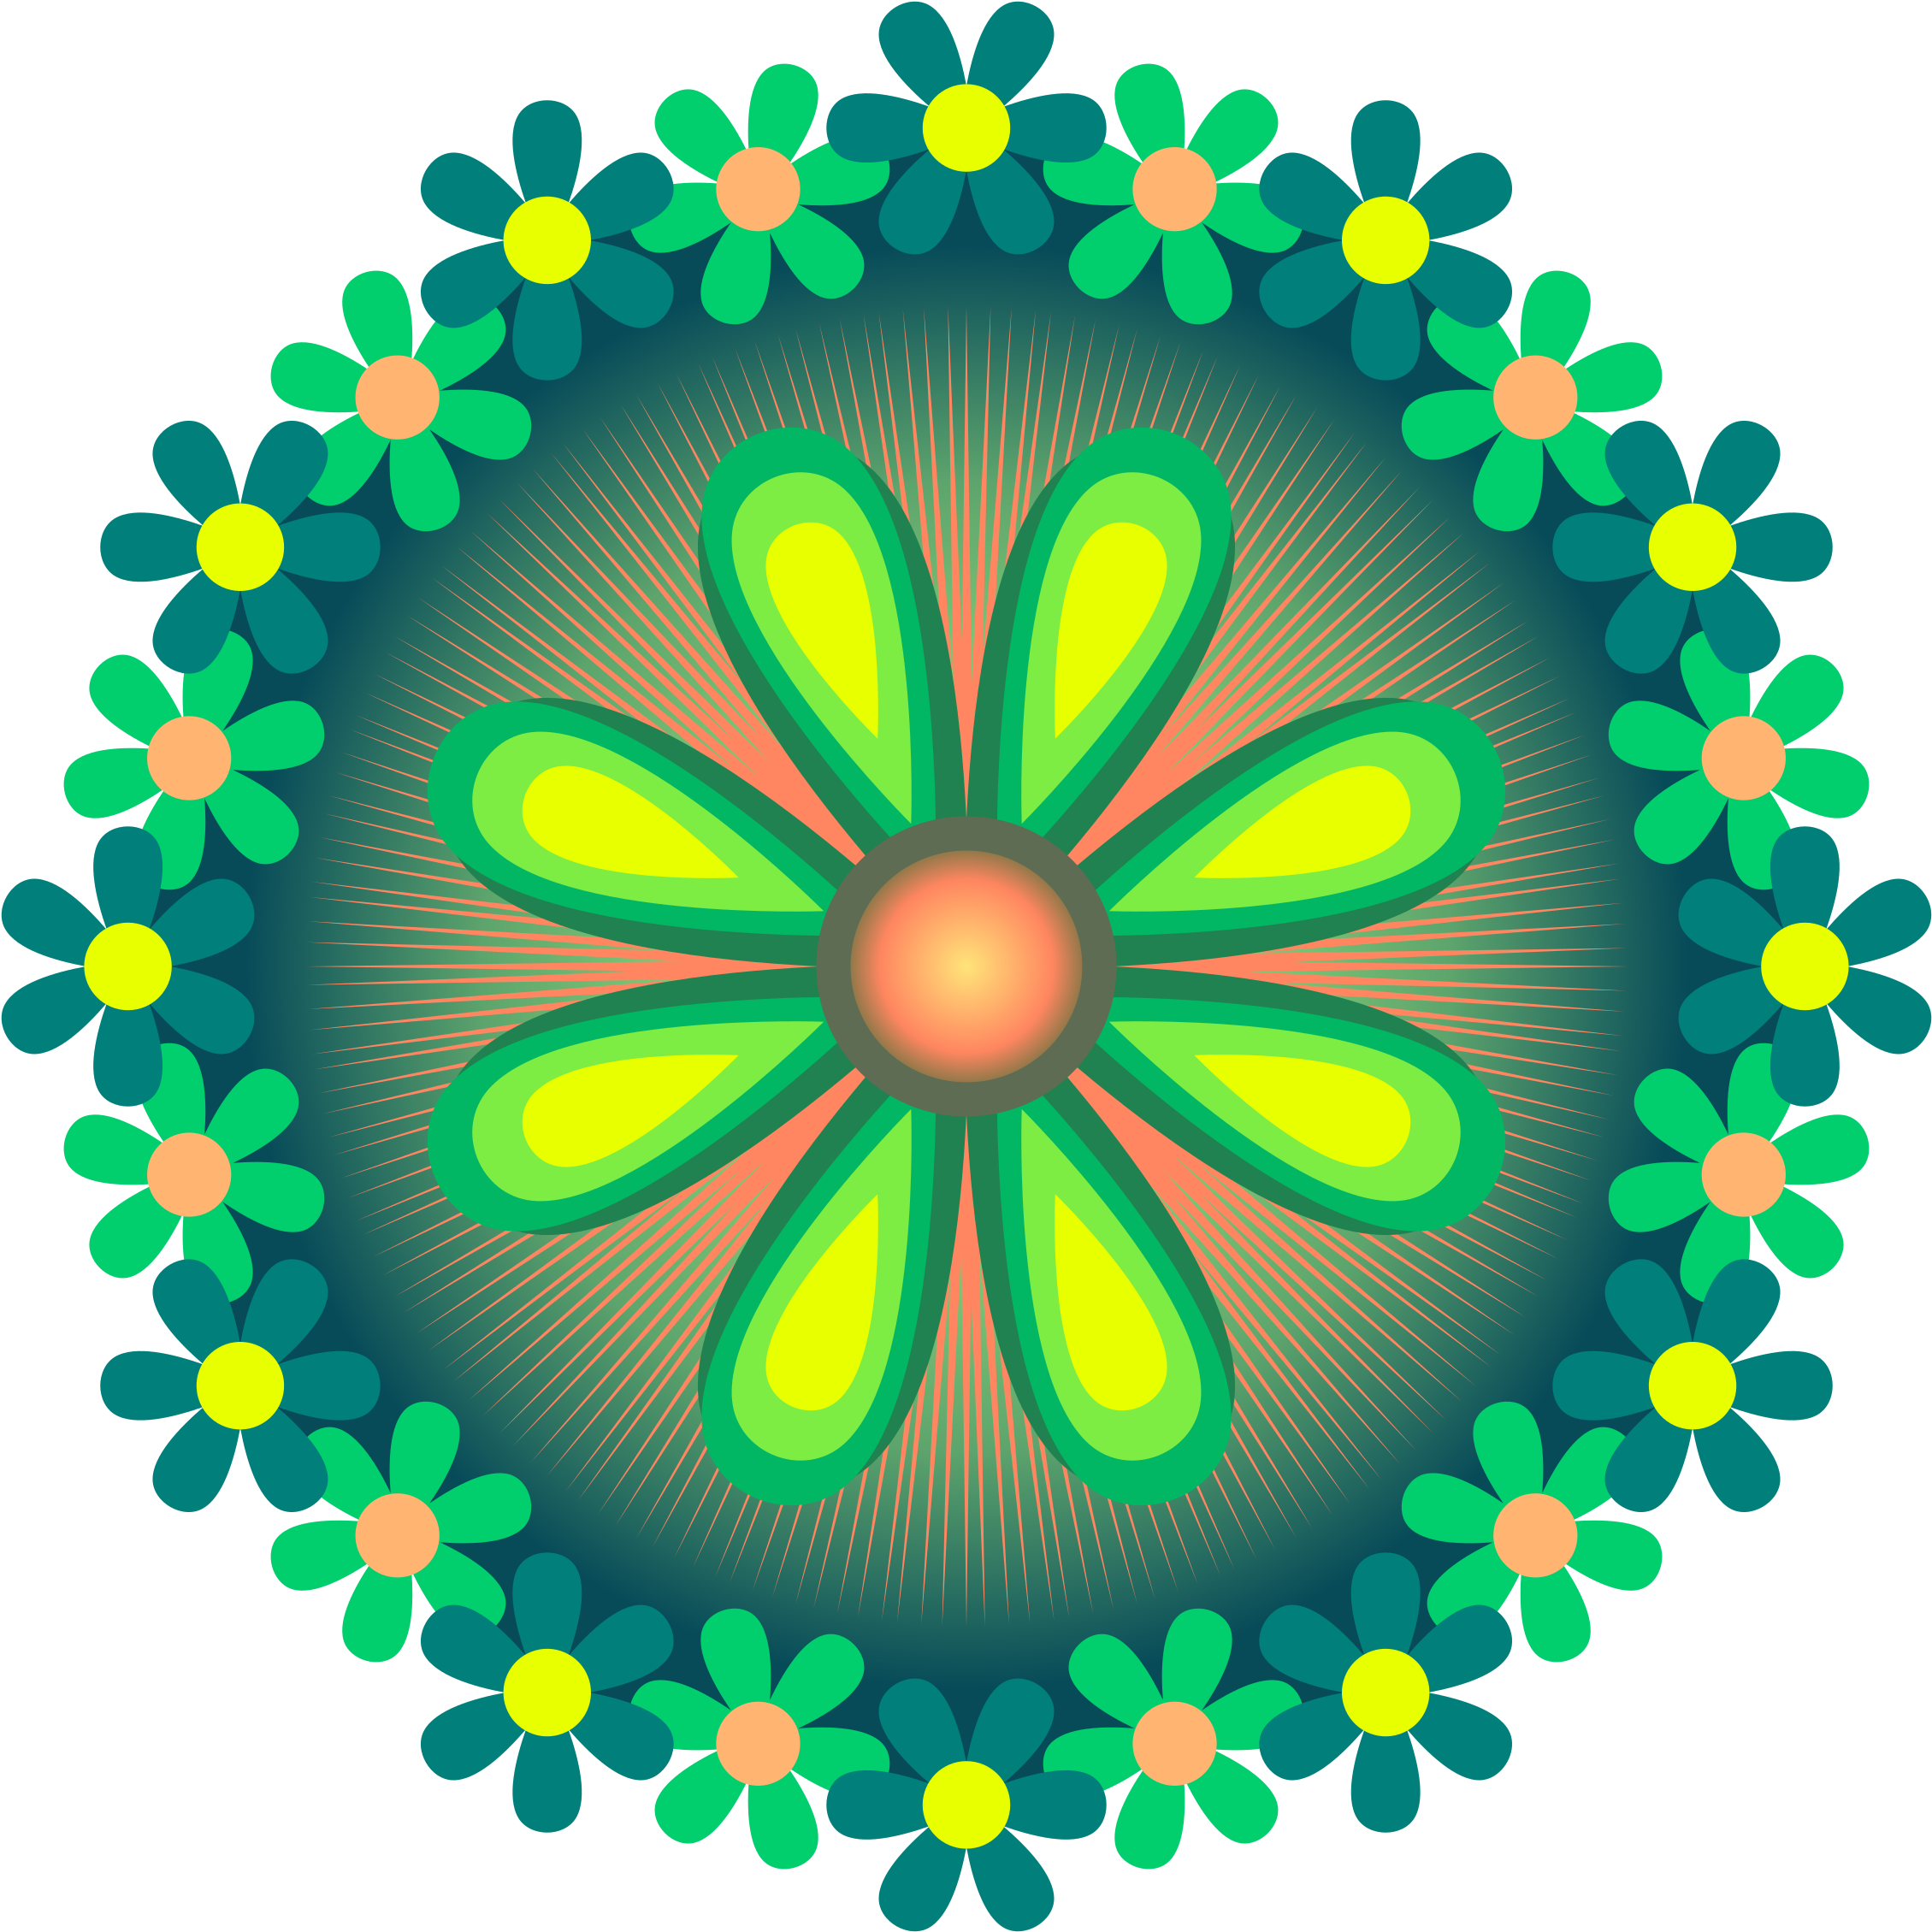 A Colorful Flower Design On A Black Background